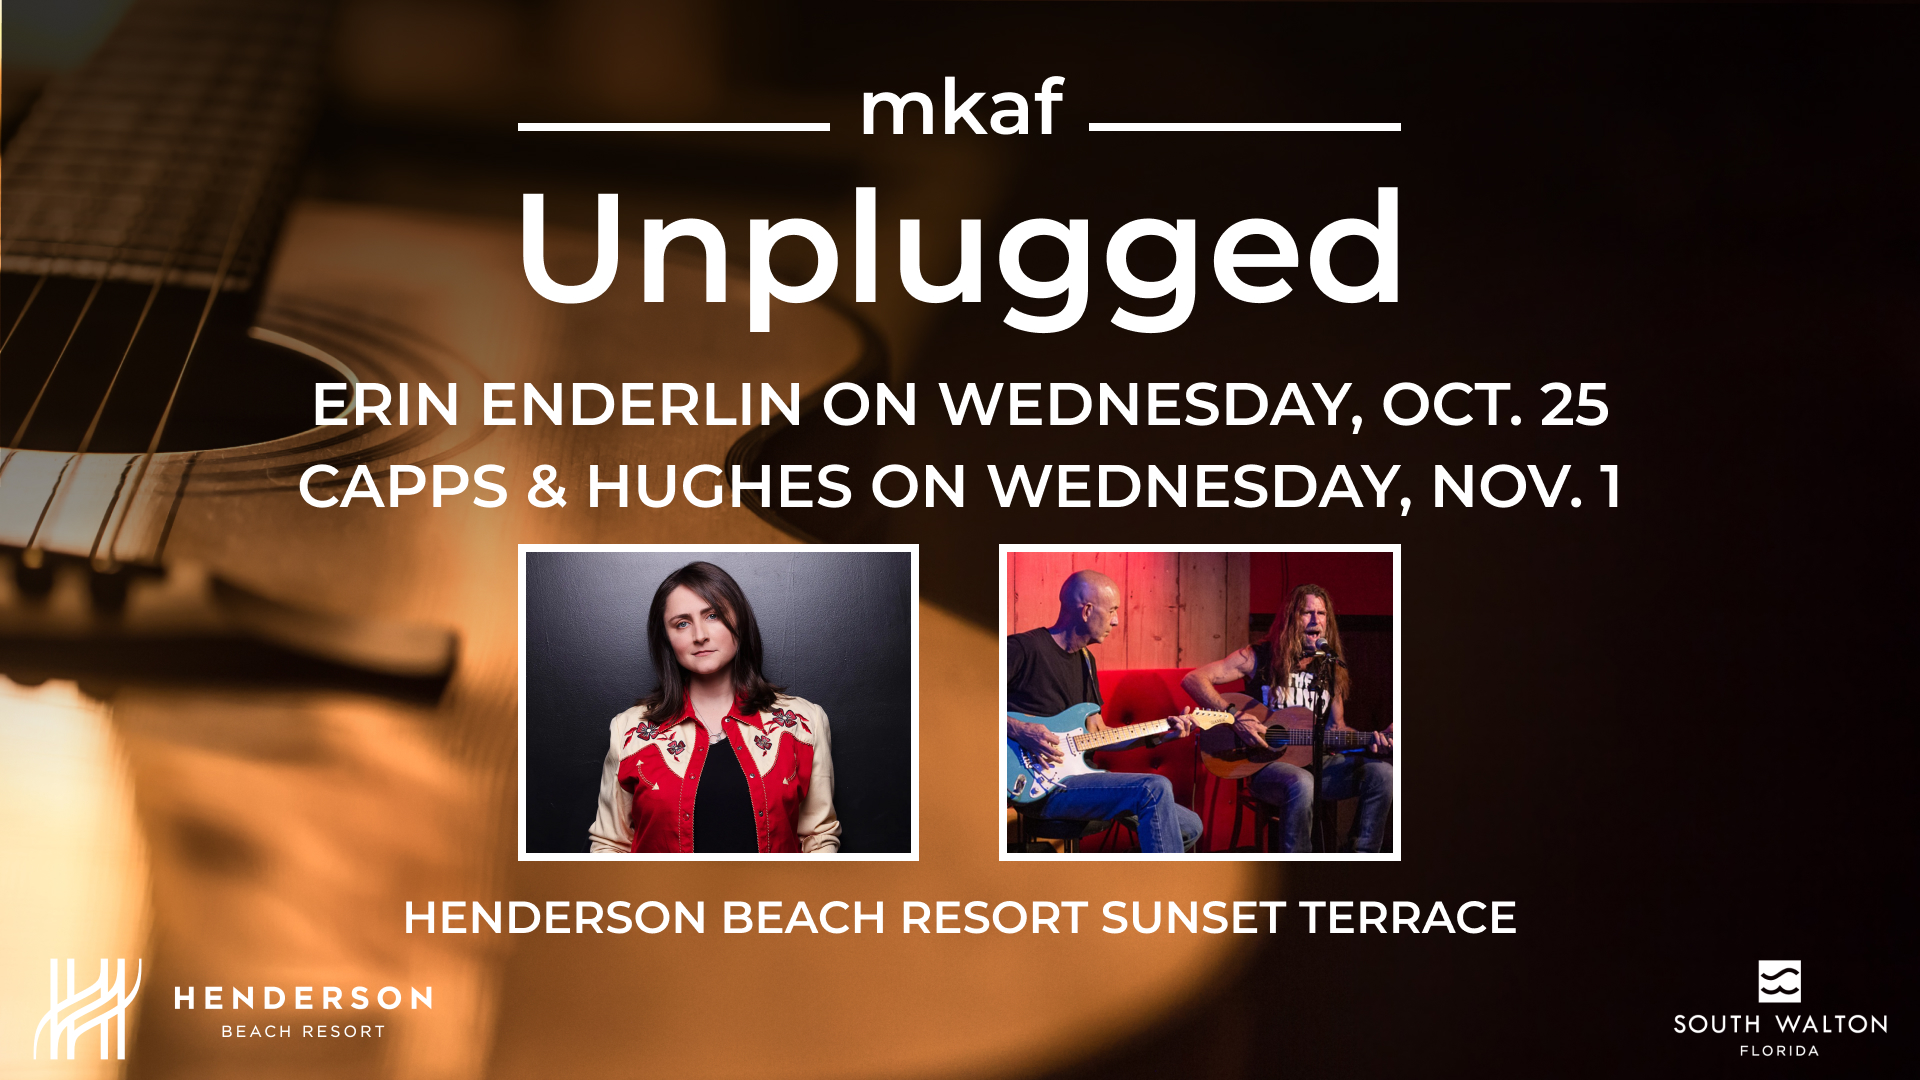 MATTIE KELLY ARTS FOUNDATION ANNOUNCES TWO NEW ‘UNPLUGGED’ FALL CONCERT DATES